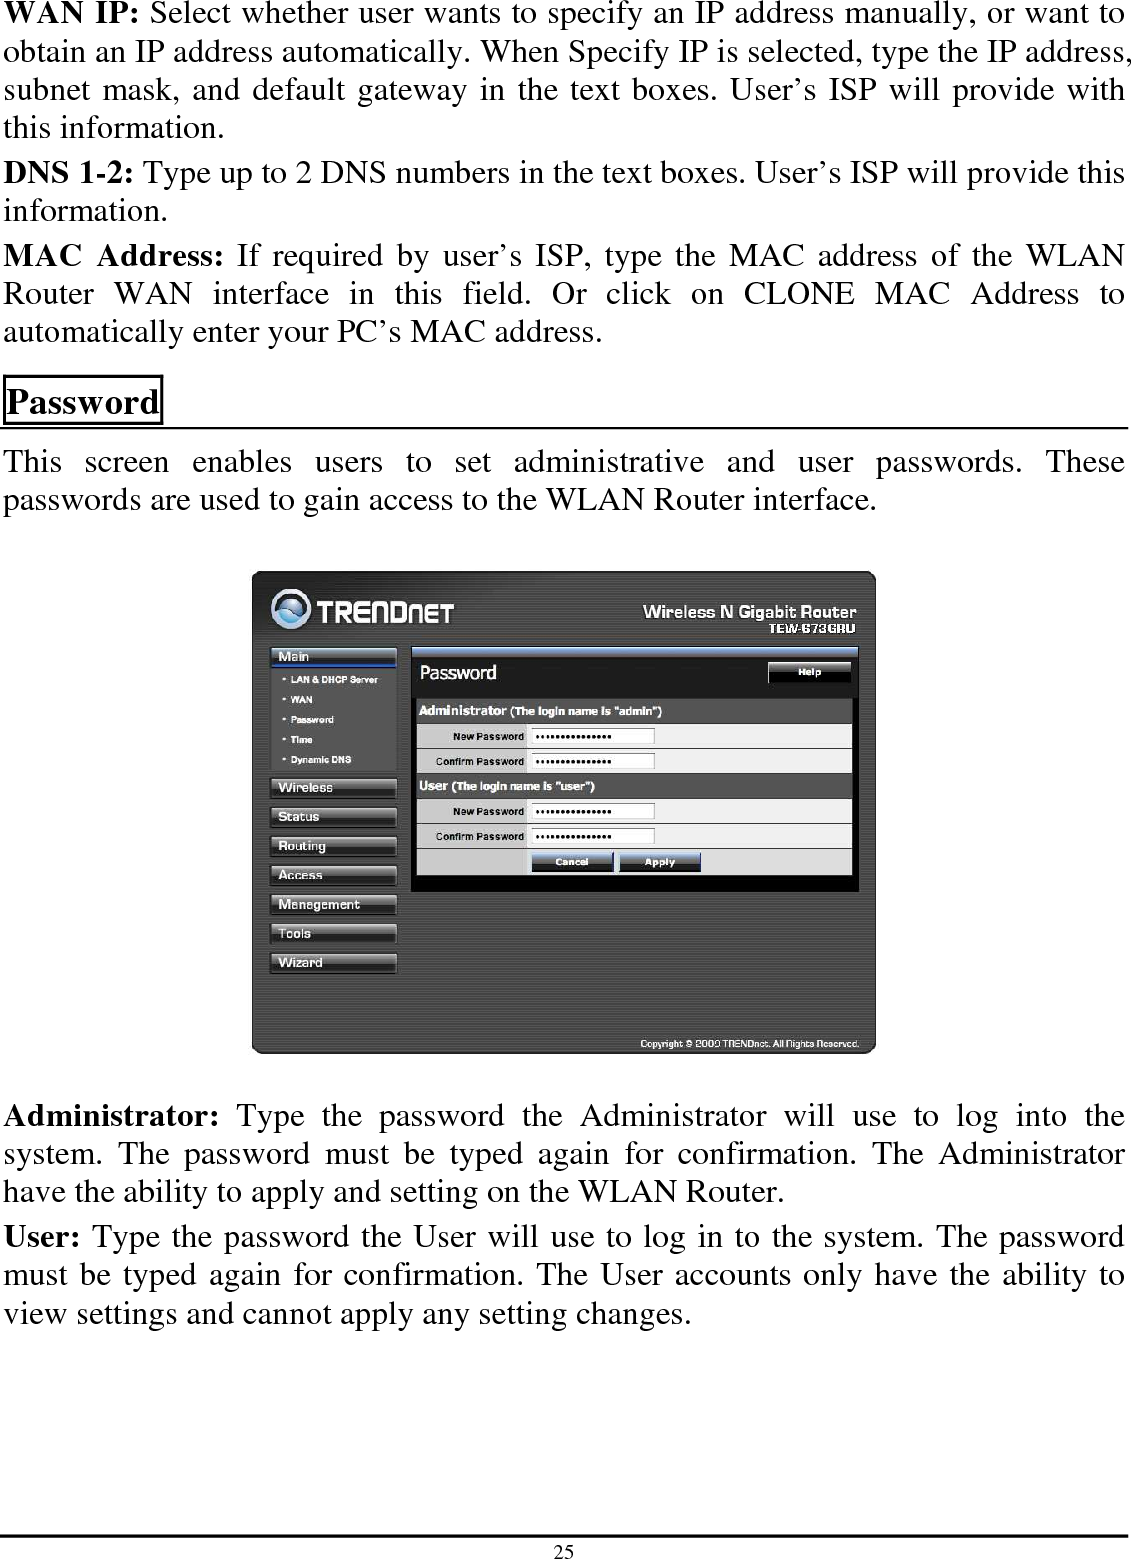 25 WAN IP: Select whether user wants to specify an IP address manually, or want to obtain an IP address automatically. When Specify IP is selected, type the IP address, subnet mask, and default gateway in the text boxes. User’s ISP will provide with this information. DNS 1-2: Type up to 2 DNS numbers in the text boxes. User’s ISP will provide this information. MAC  Address: If required by  user’s ISP, type the  MAC address of the  WLAN Router  WAN  interface  in  this  field.  Or  click  on  CLONE  MAC  Address  to automatically enter your PC’s MAC address.  Password This  screen  enables  users  to  set  administrative  and  user  passwords.  These passwords are used to gain access to the WLAN Router interface.    Administrator:  Type  the  password  the  Administrator  will  use  to  log  into  the system.  The  password  must  be  typed  again  for  confirmation.  The  Administrator have the ability to apply and setting on the WLAN Router. User: Type the password the User will use to log in to the system. The password must be typed again for confirmation. The User accounts only have the ability to view settings and cannot apply any setting changes.  